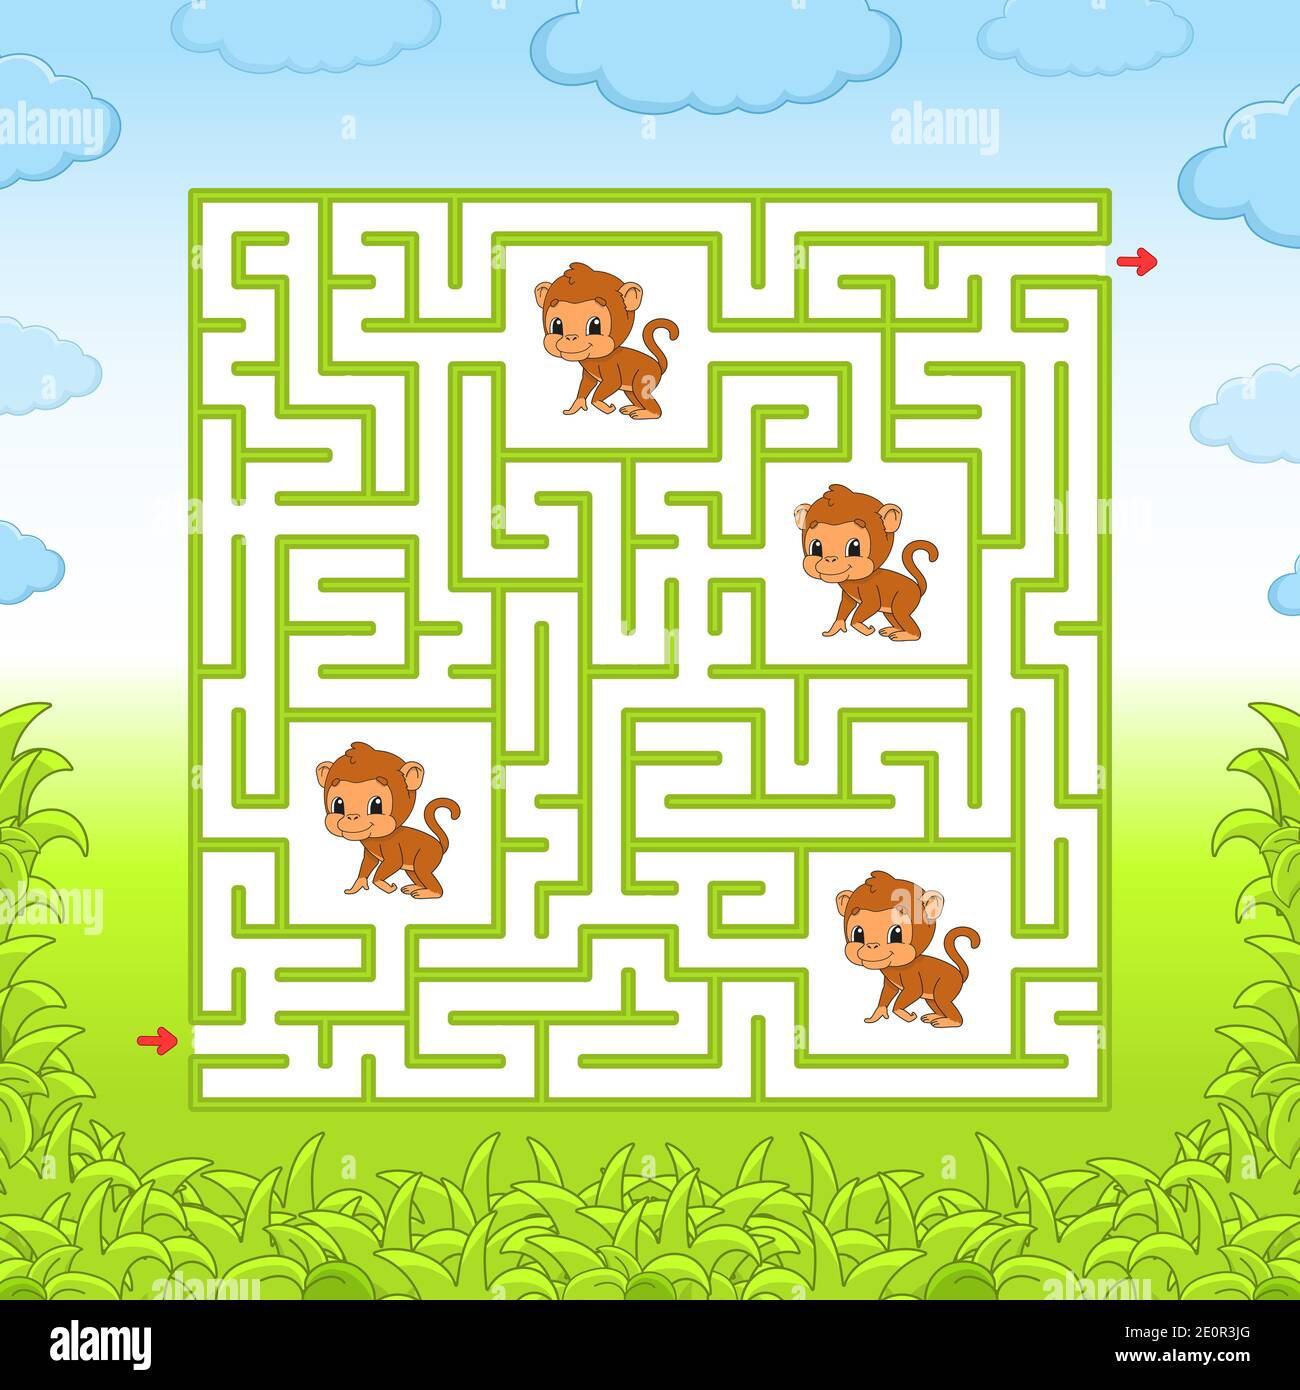 Maze. Game for kids. Funny labyrinth. Education developing worksheet. Activity page. Puzzle for children. Cute cartoon style. Riddle for preschool. Lo Stock Vector